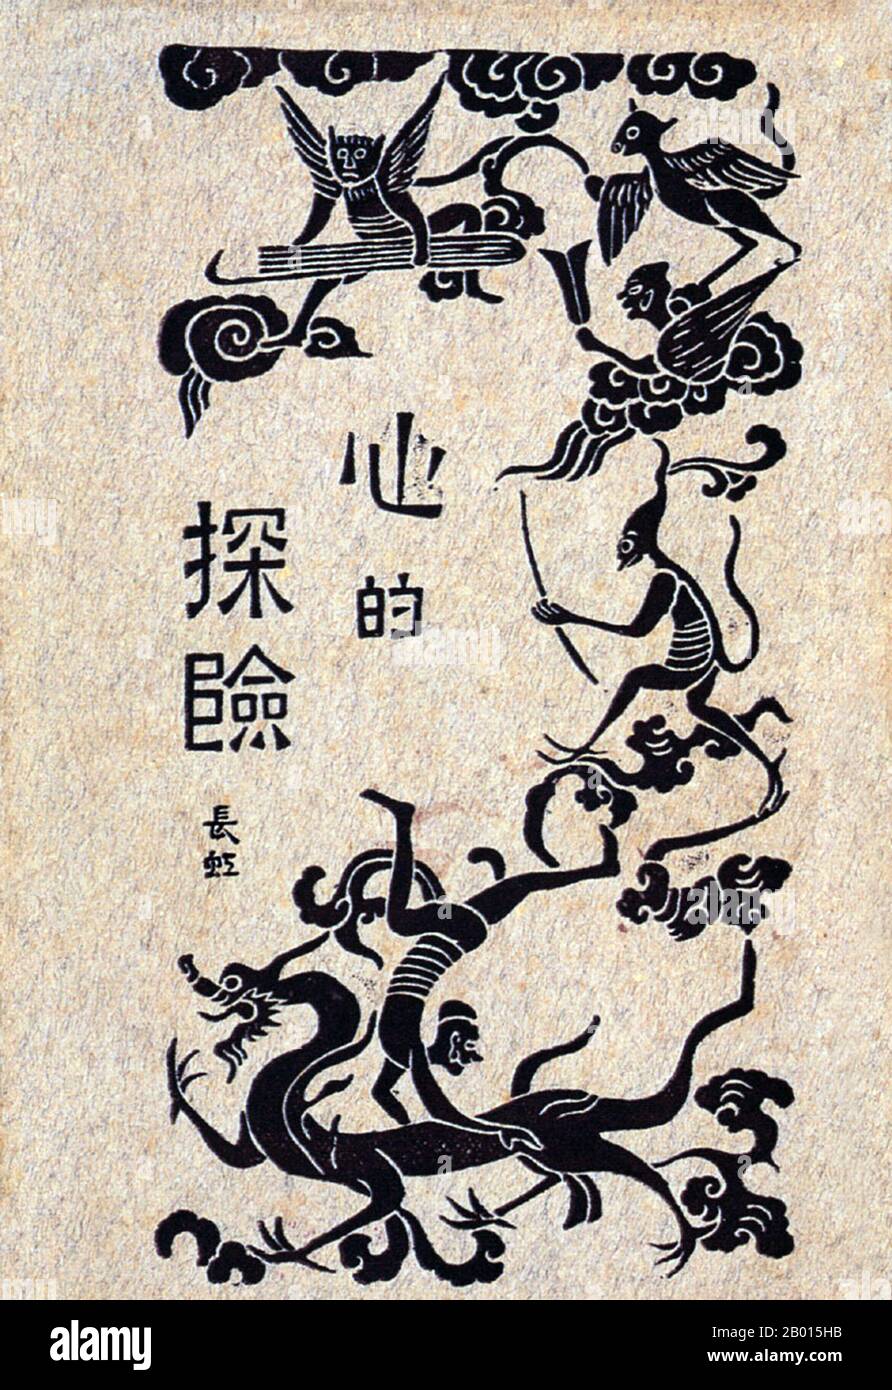 China: Literary revolution - Cover design for Xinde Tanxian ('Exploring the Heart'), 1926.  Cover design for Exploring the Heart (Xinde Tanxian). Text by Chang Hong, edited by Lu Xun, published by Beixin Book Company, Beijing 1926. Stock Photo